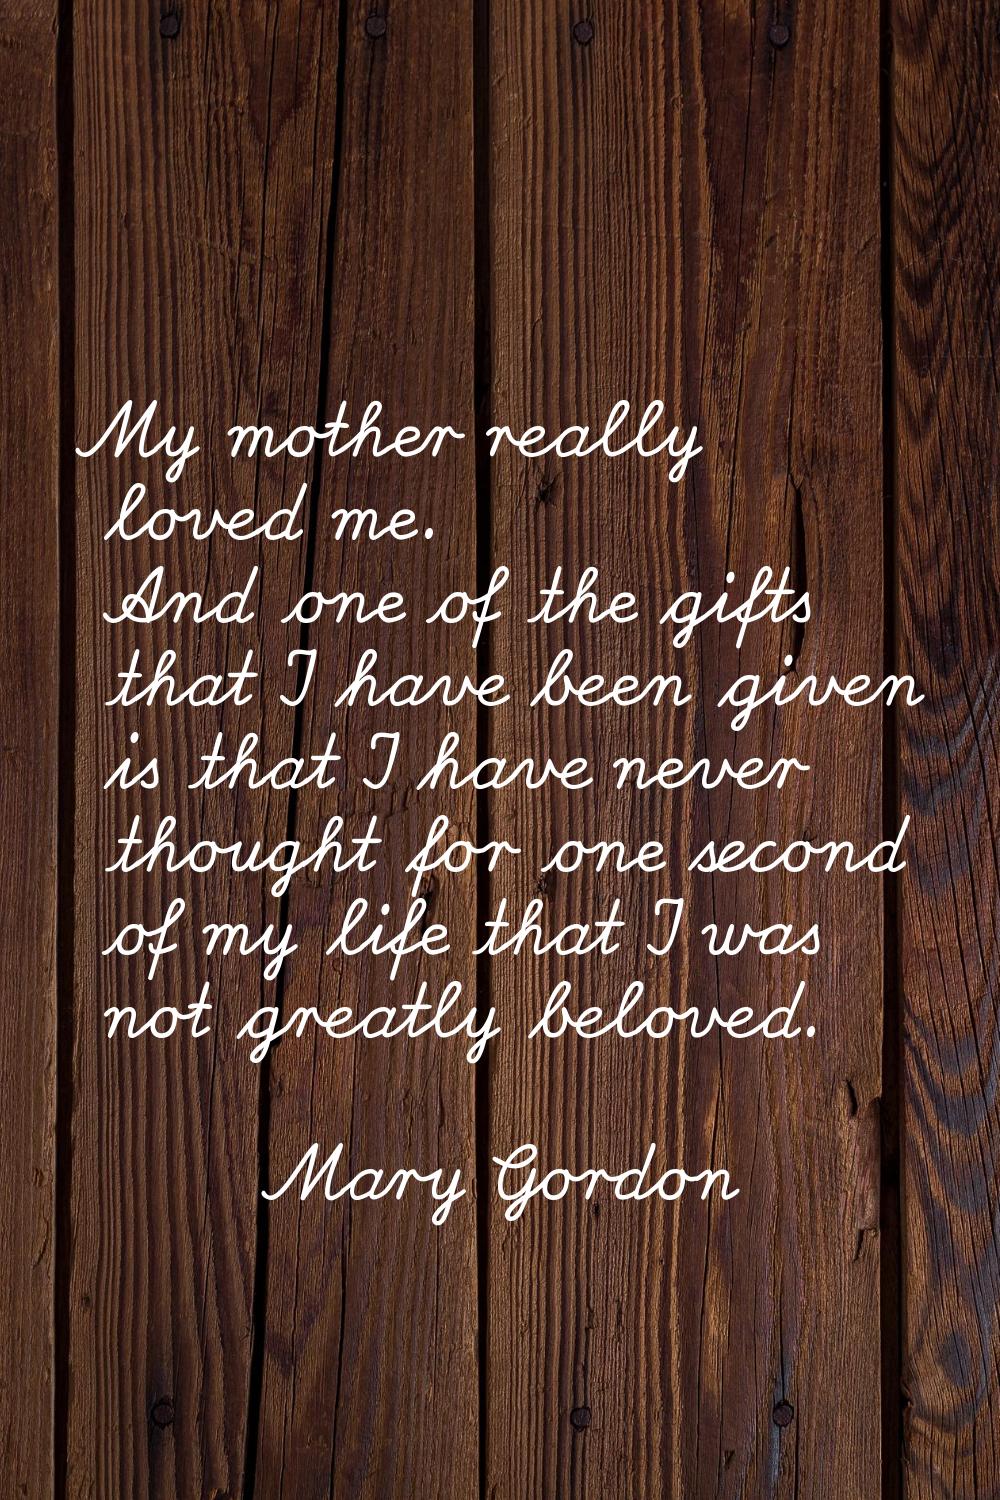 My mother really loved me. And one of the gifts that I have been given is that I have never thought